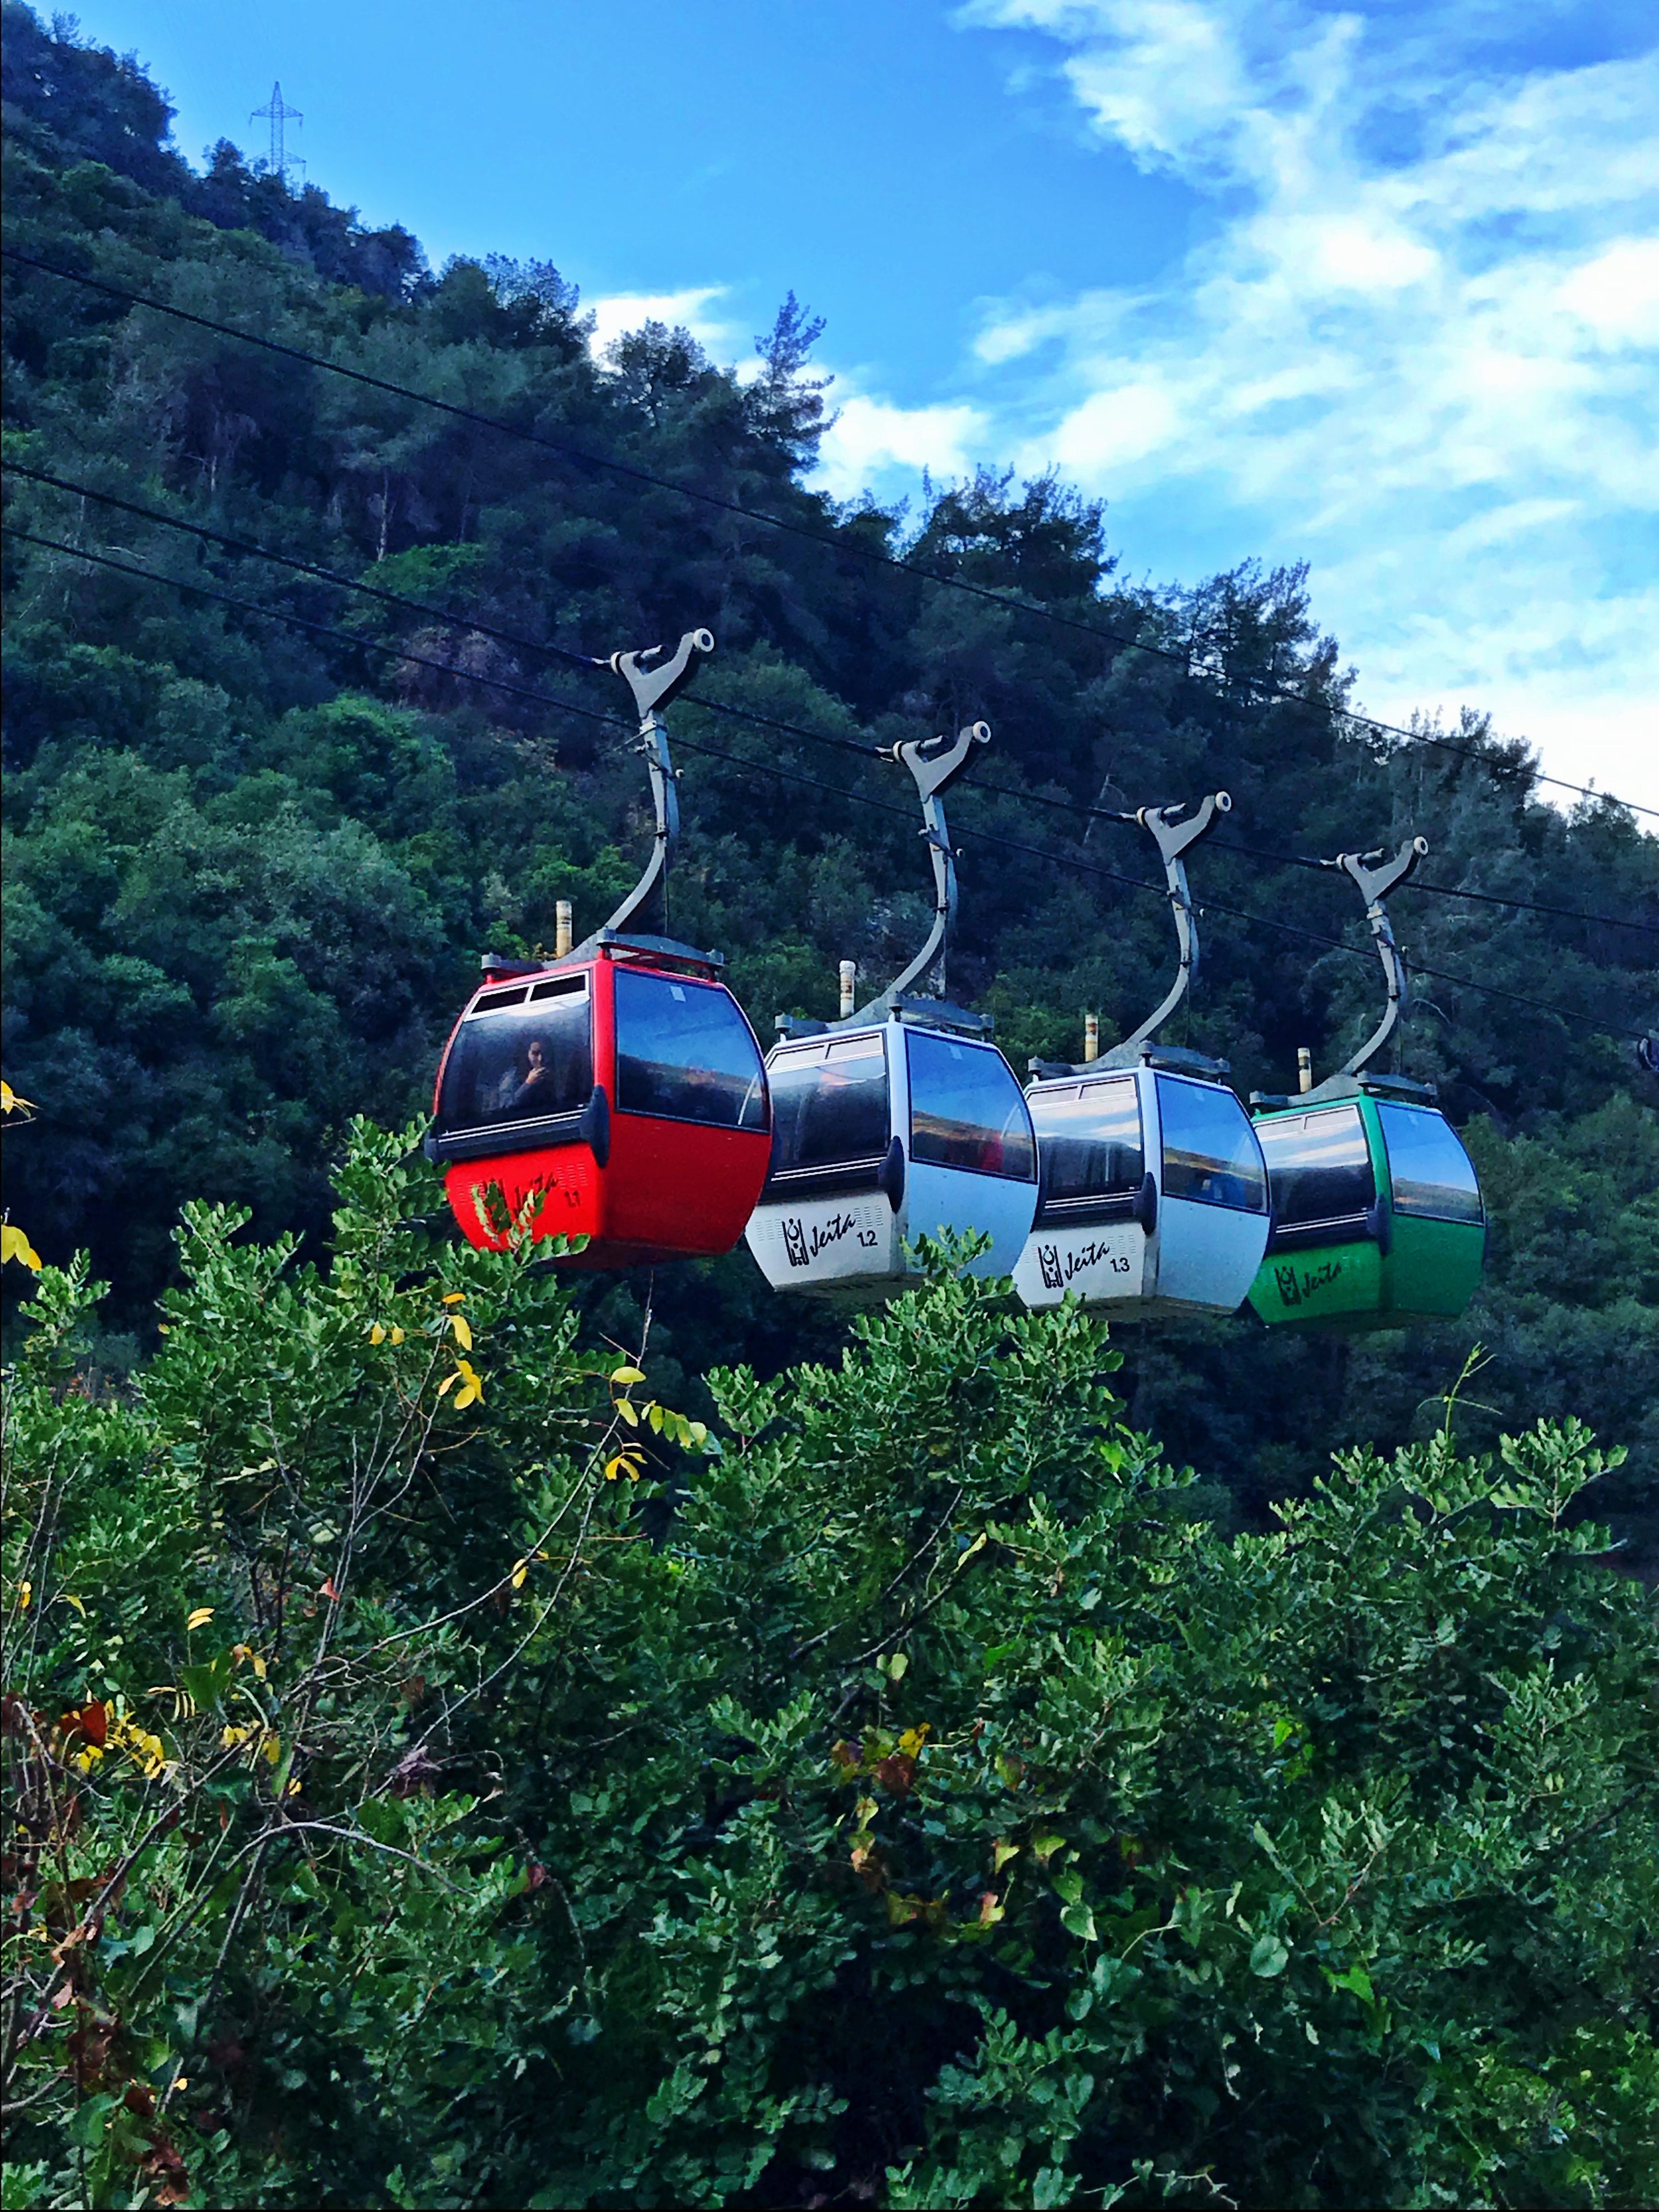 Copy of Cable Cart - Jeita Grotto